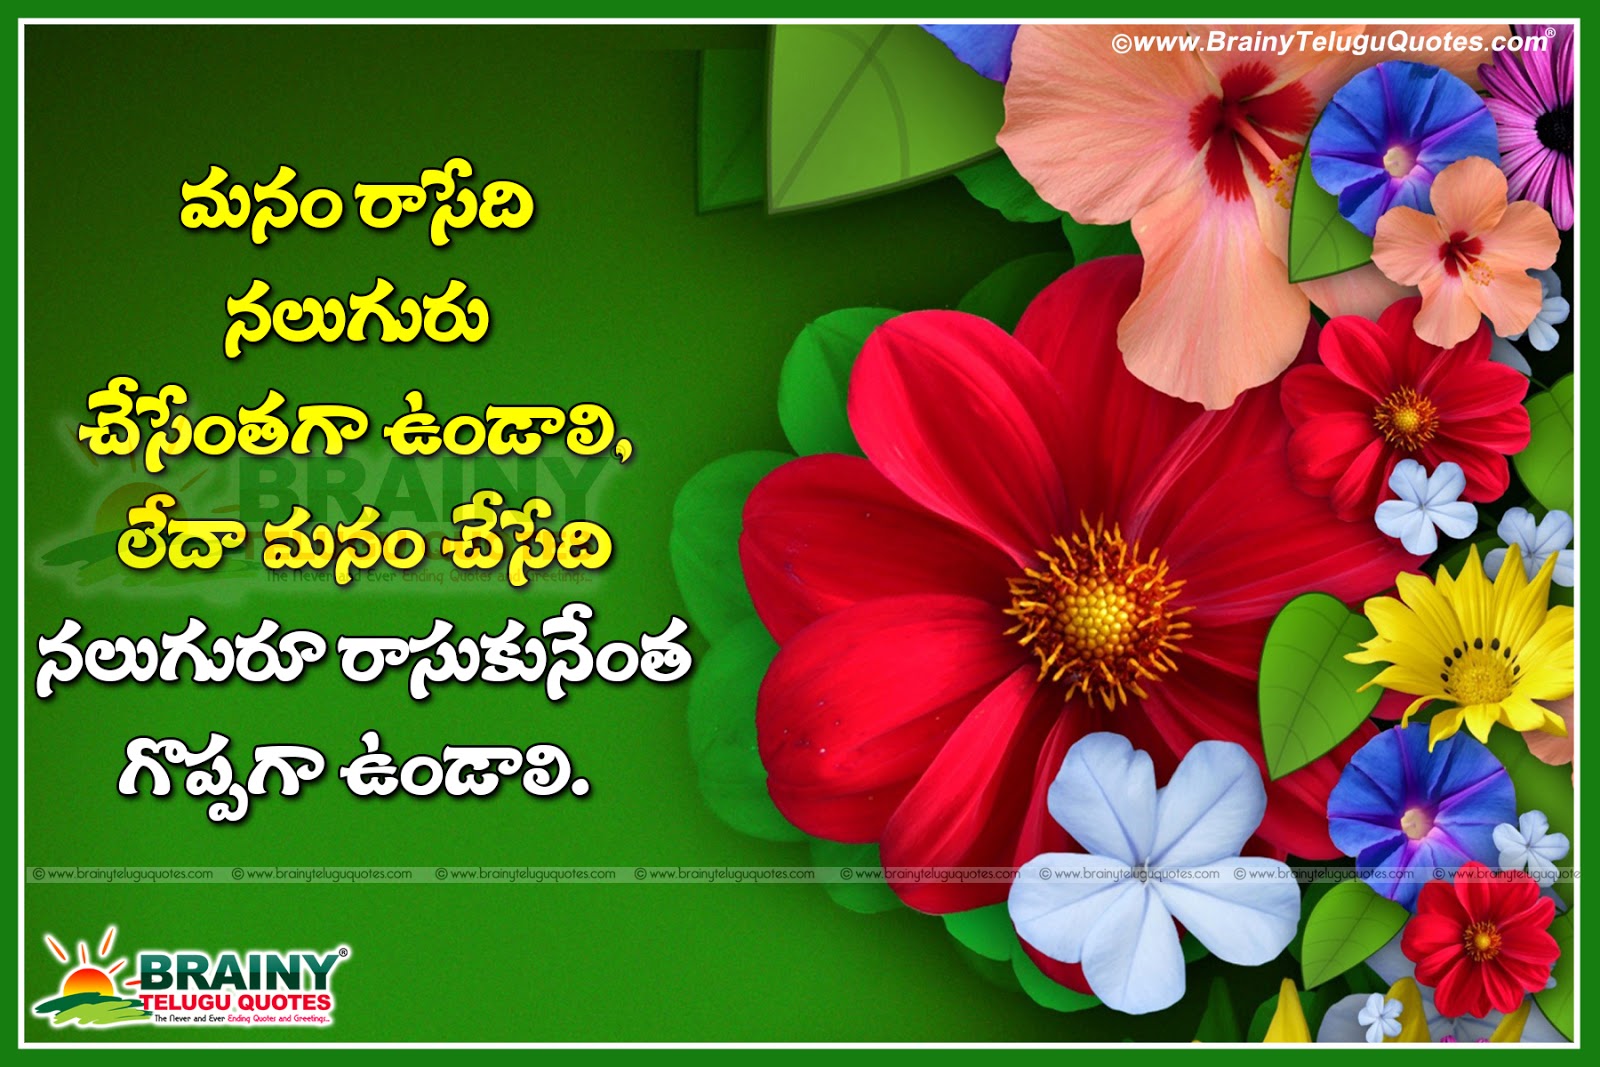 Here is a Telugu Language Nice Show Way for Life Liens in Telugu Telugu New Job Quotations online Great Step Ahead Quotations in Telugu Language